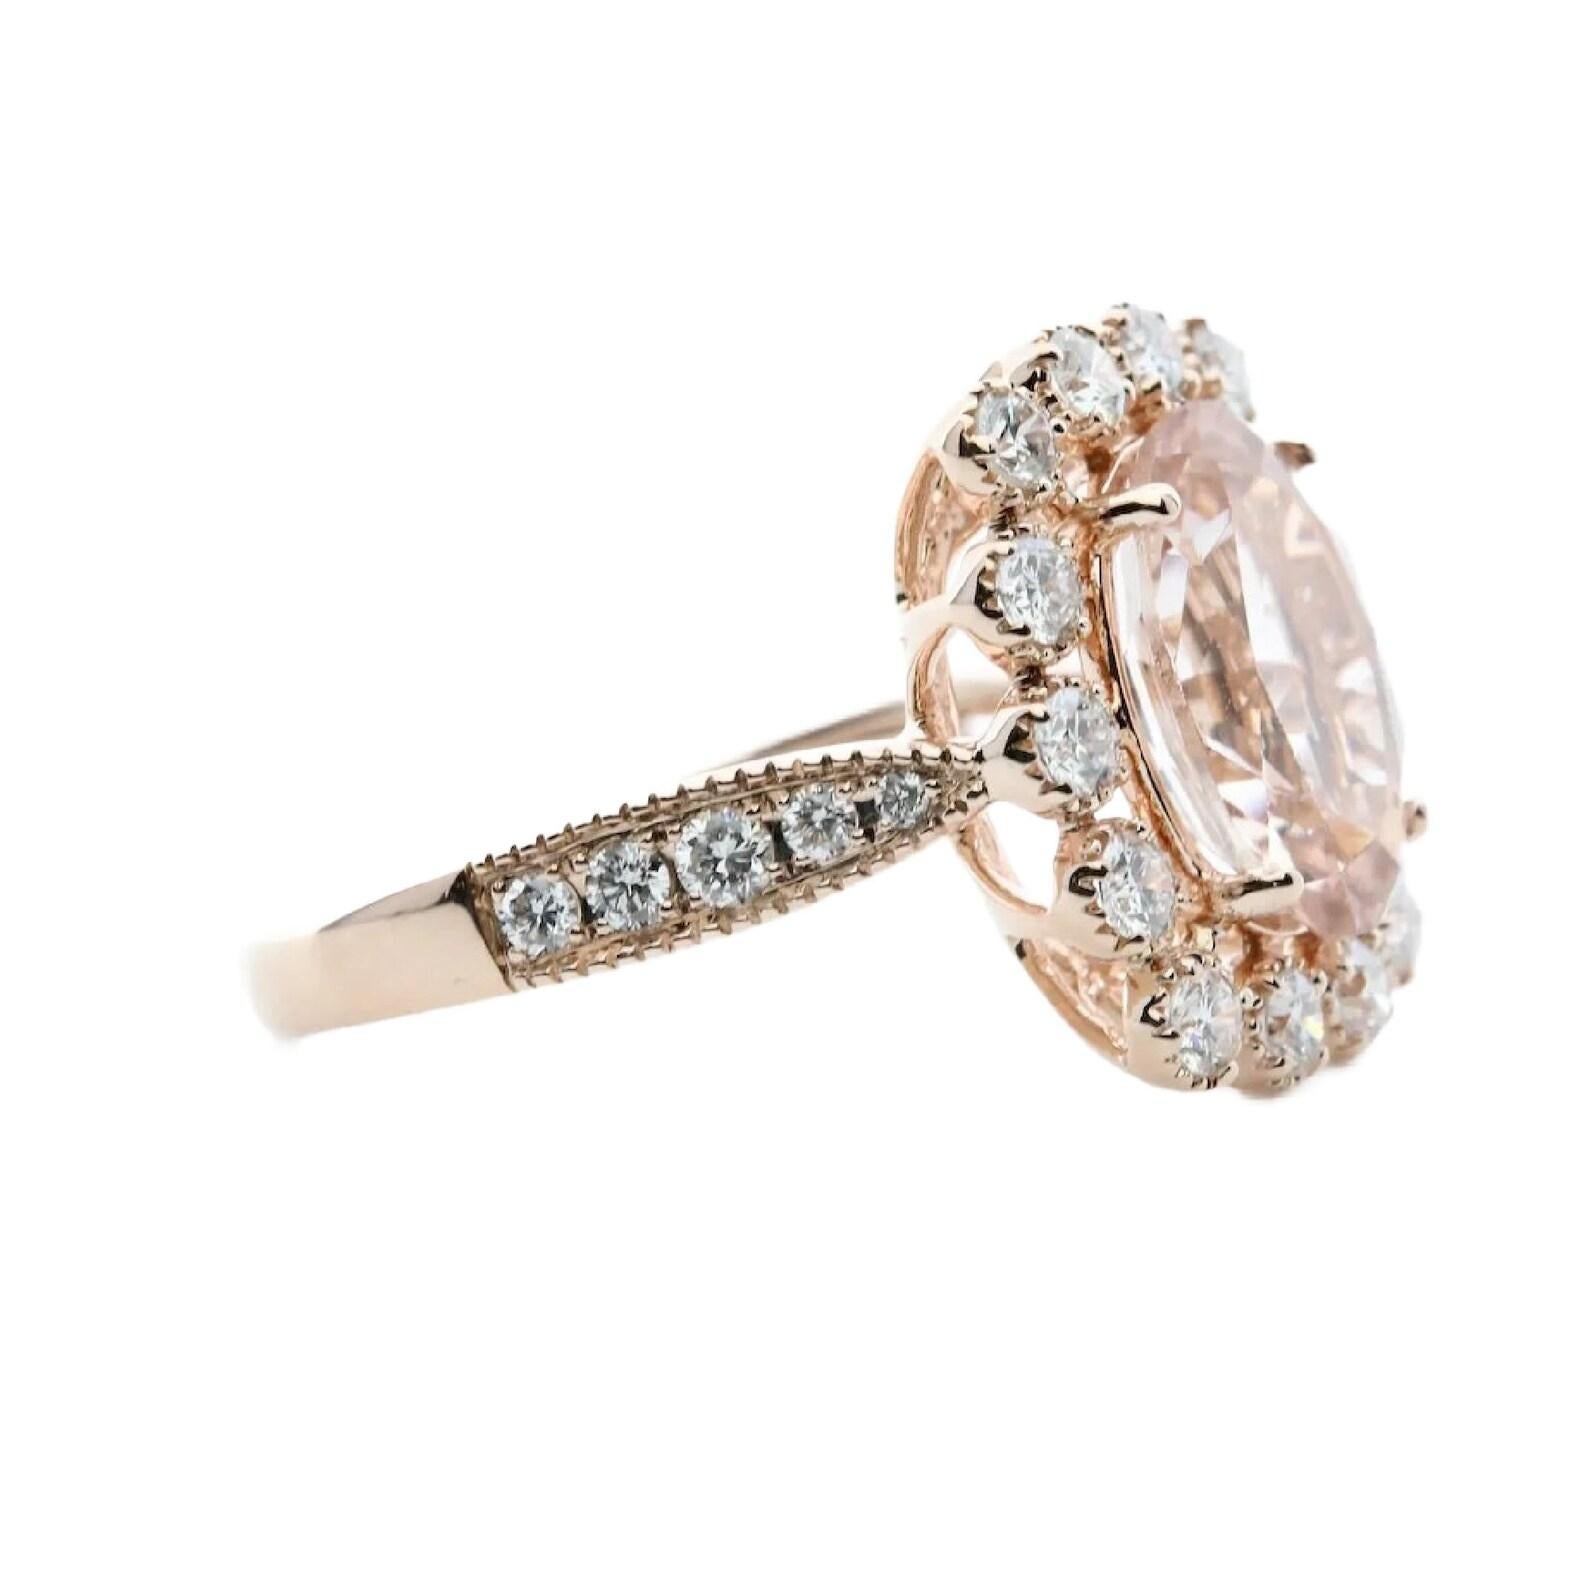 A morganite, and diamond ring crafted in 14 karat rose gold. Centered by a 4.00 carat natural peach colored morganite secured by four polished prongs. Surrounding the morganite are 14 bezel set and 10 pave set accent diamonds weighing a combined